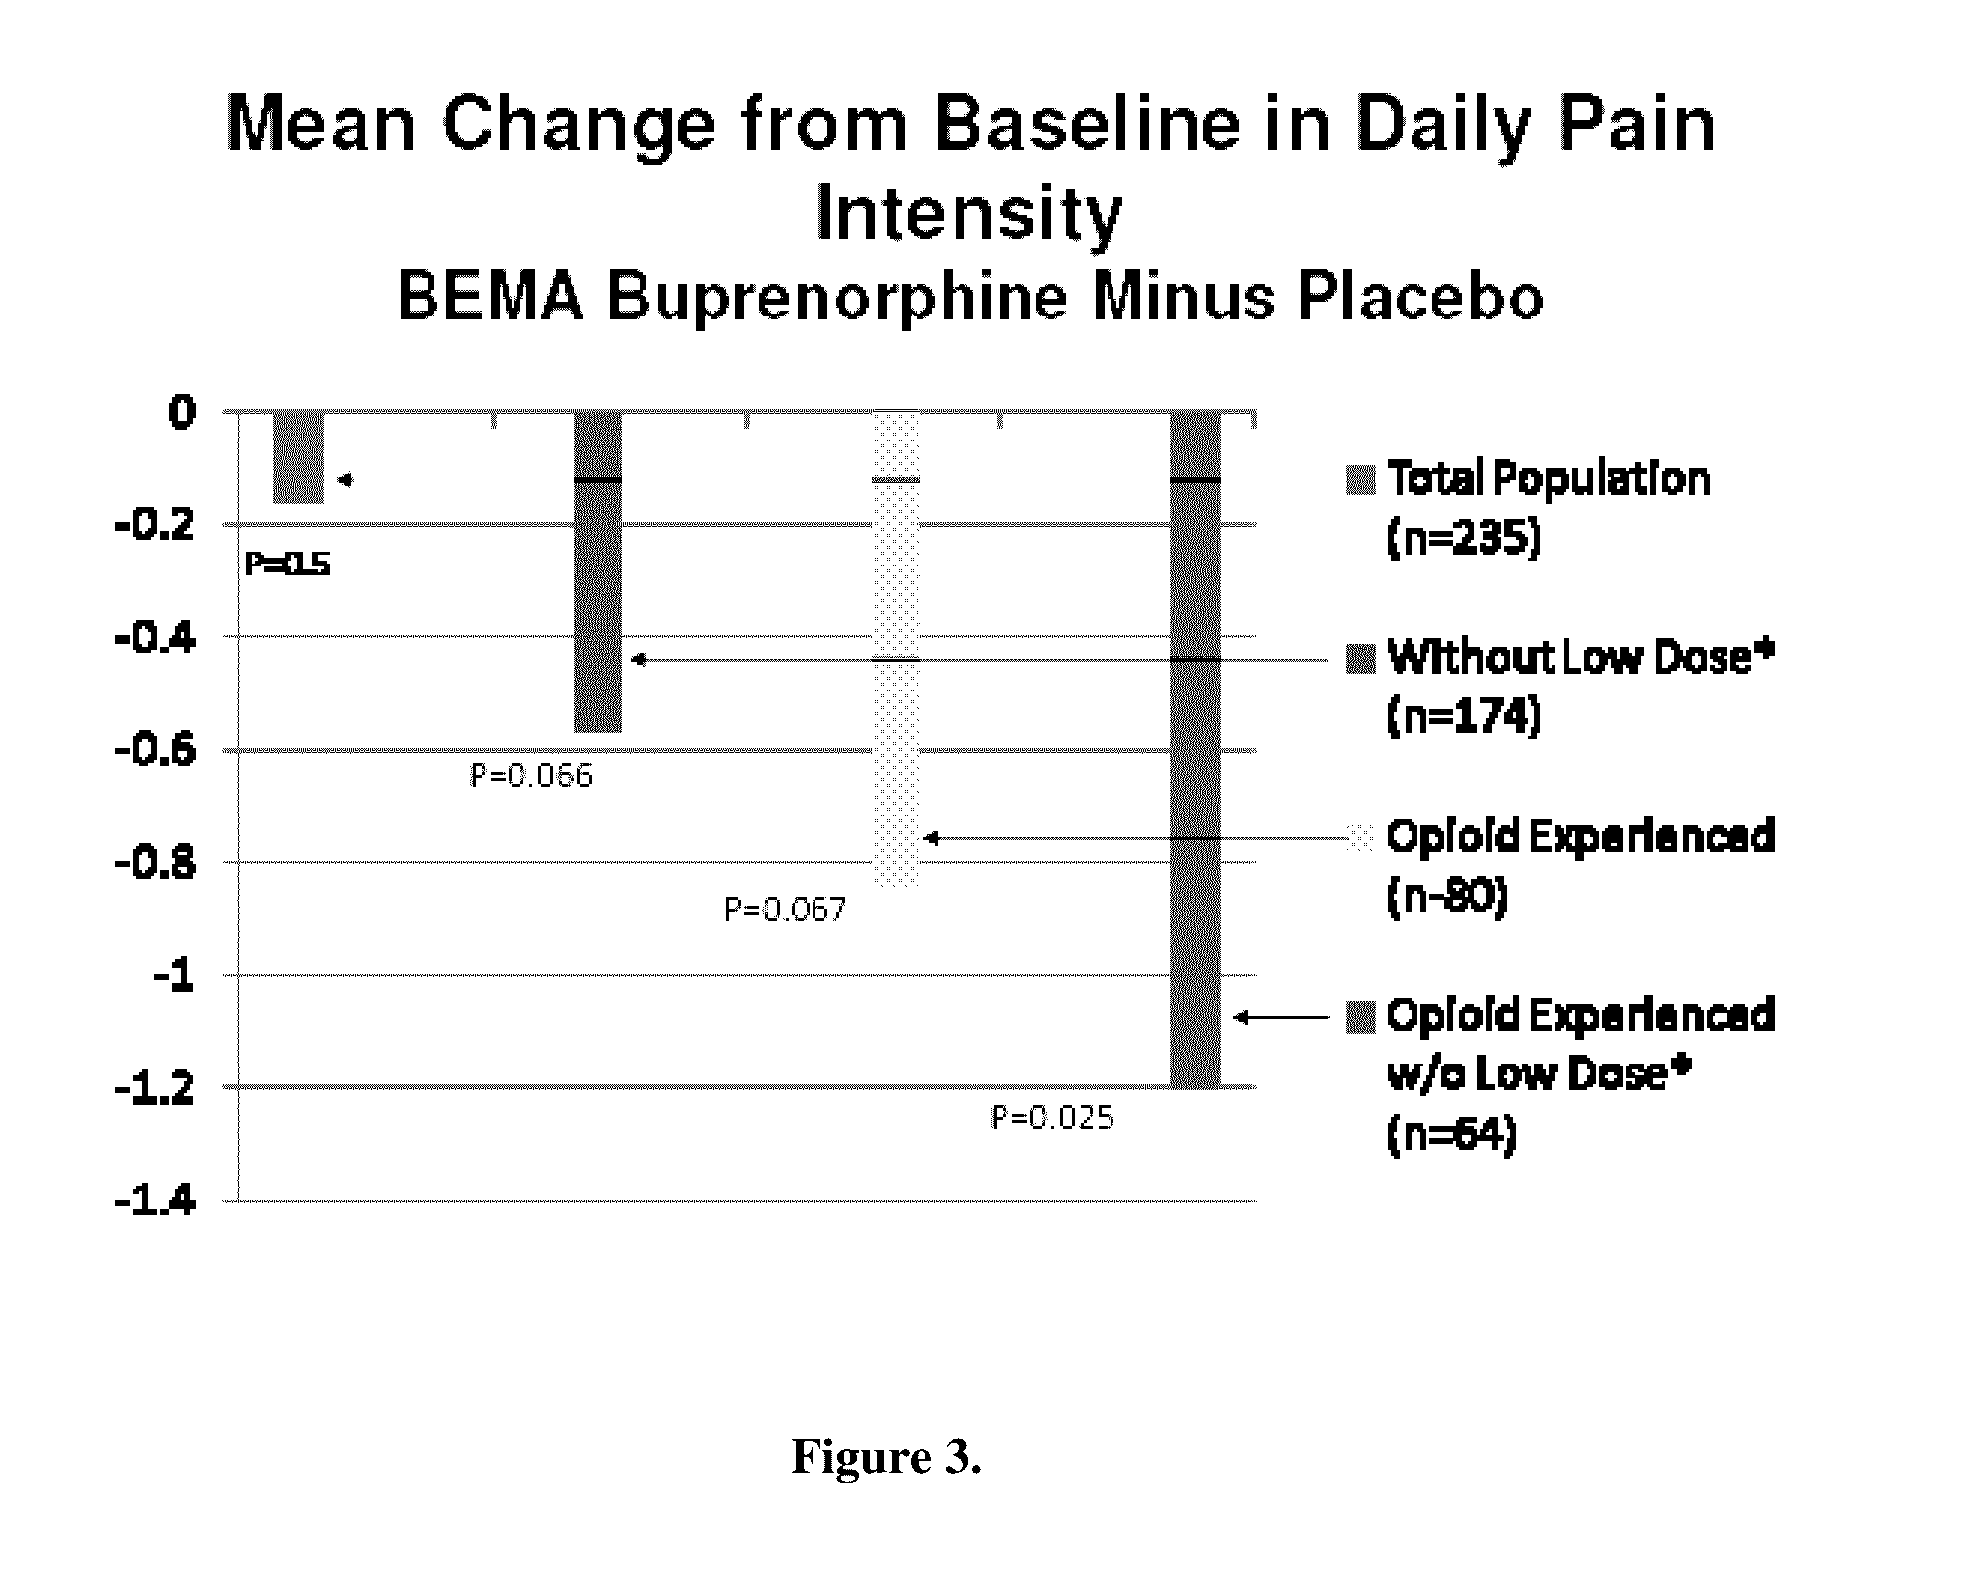 Transmucosal drug delivery devices for use in chronic pain relief